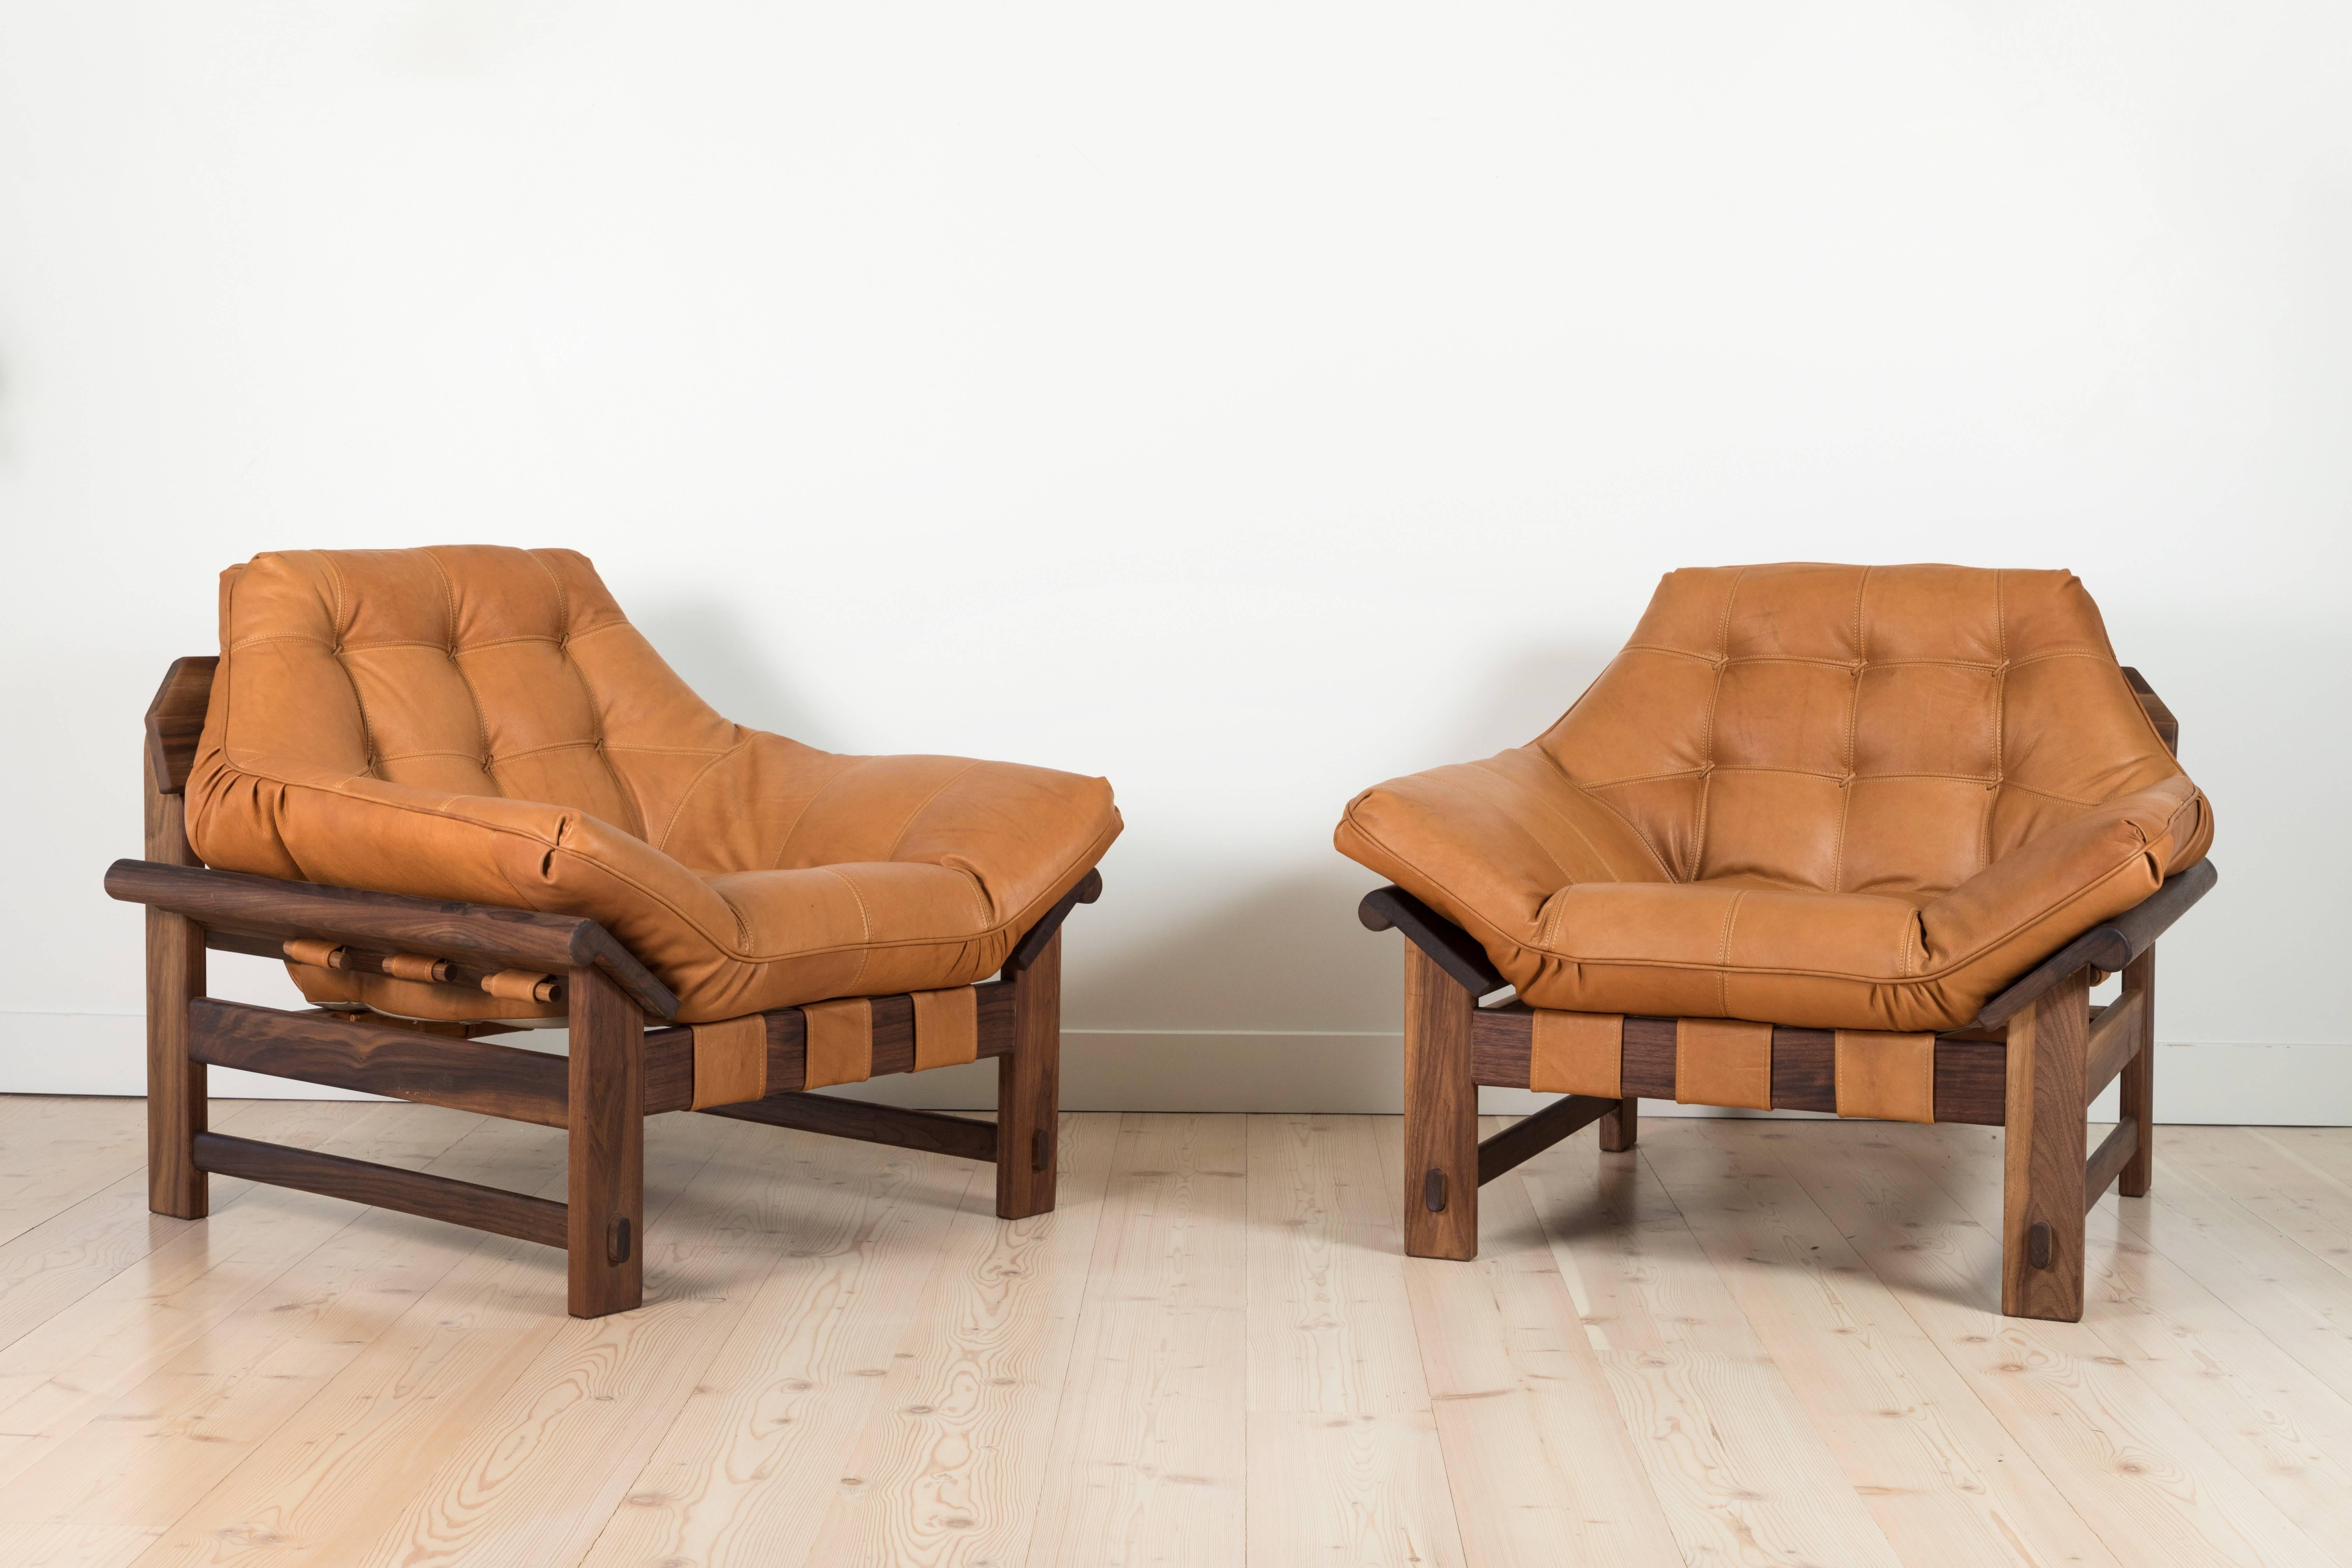 The Ojai Lounge Chair features a solid White Oak or solid Walnut base and a single tufted leather cushion with leather straps. Shown here in Tan Leather and Oiled Walnut. 

The Lawson-Fenning Collection is designed and handmade in Los Angeles,